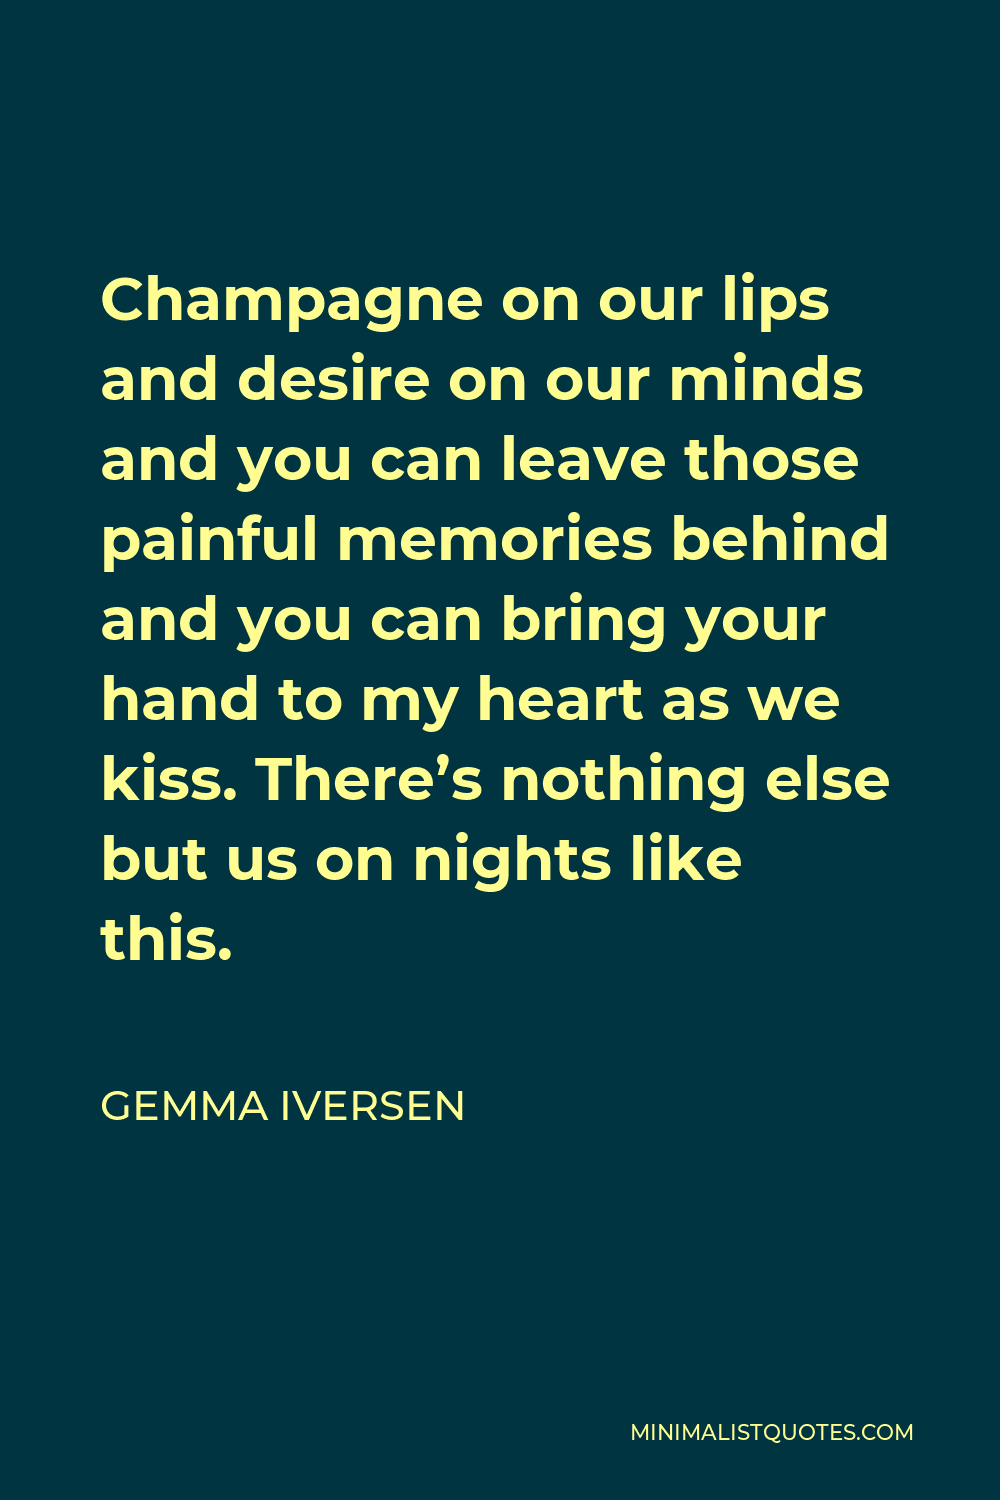 Gemma Iversen Quote - Champagne on our lips and desire on our minds and you can leave those painful memories behind and you can bring your hand to my heart as we kiss. There’s nothing else but us on nights like this.